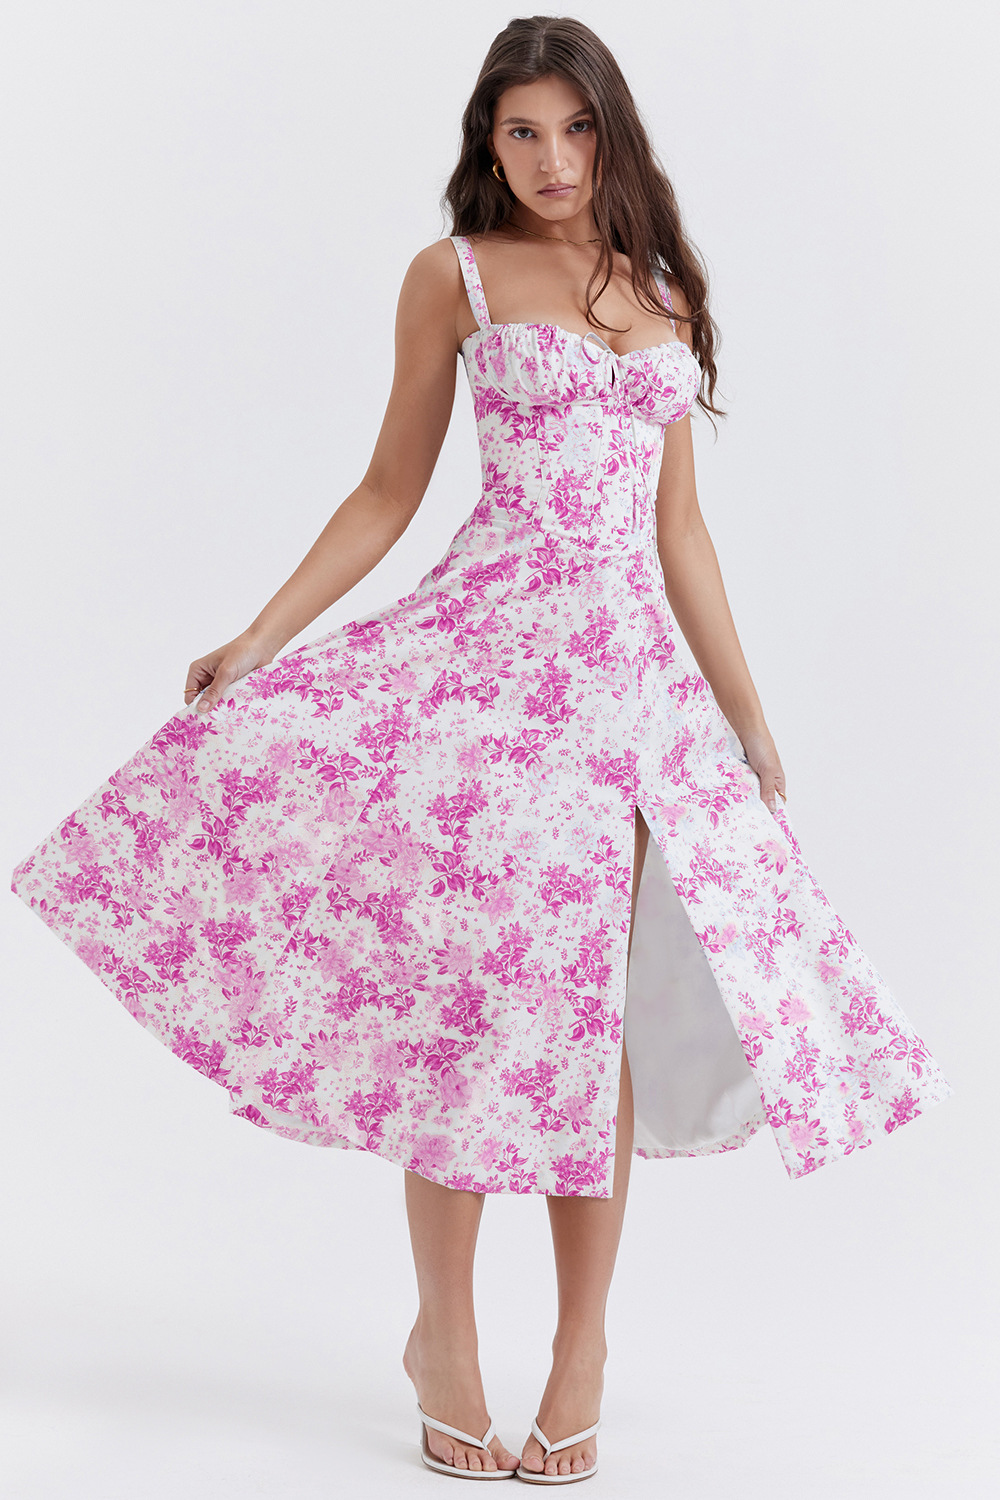 👗Comfortable Beauty-No underwire-Print Bustier Sundress😍Fits All Sizes Up To 4XL & 50% OFF